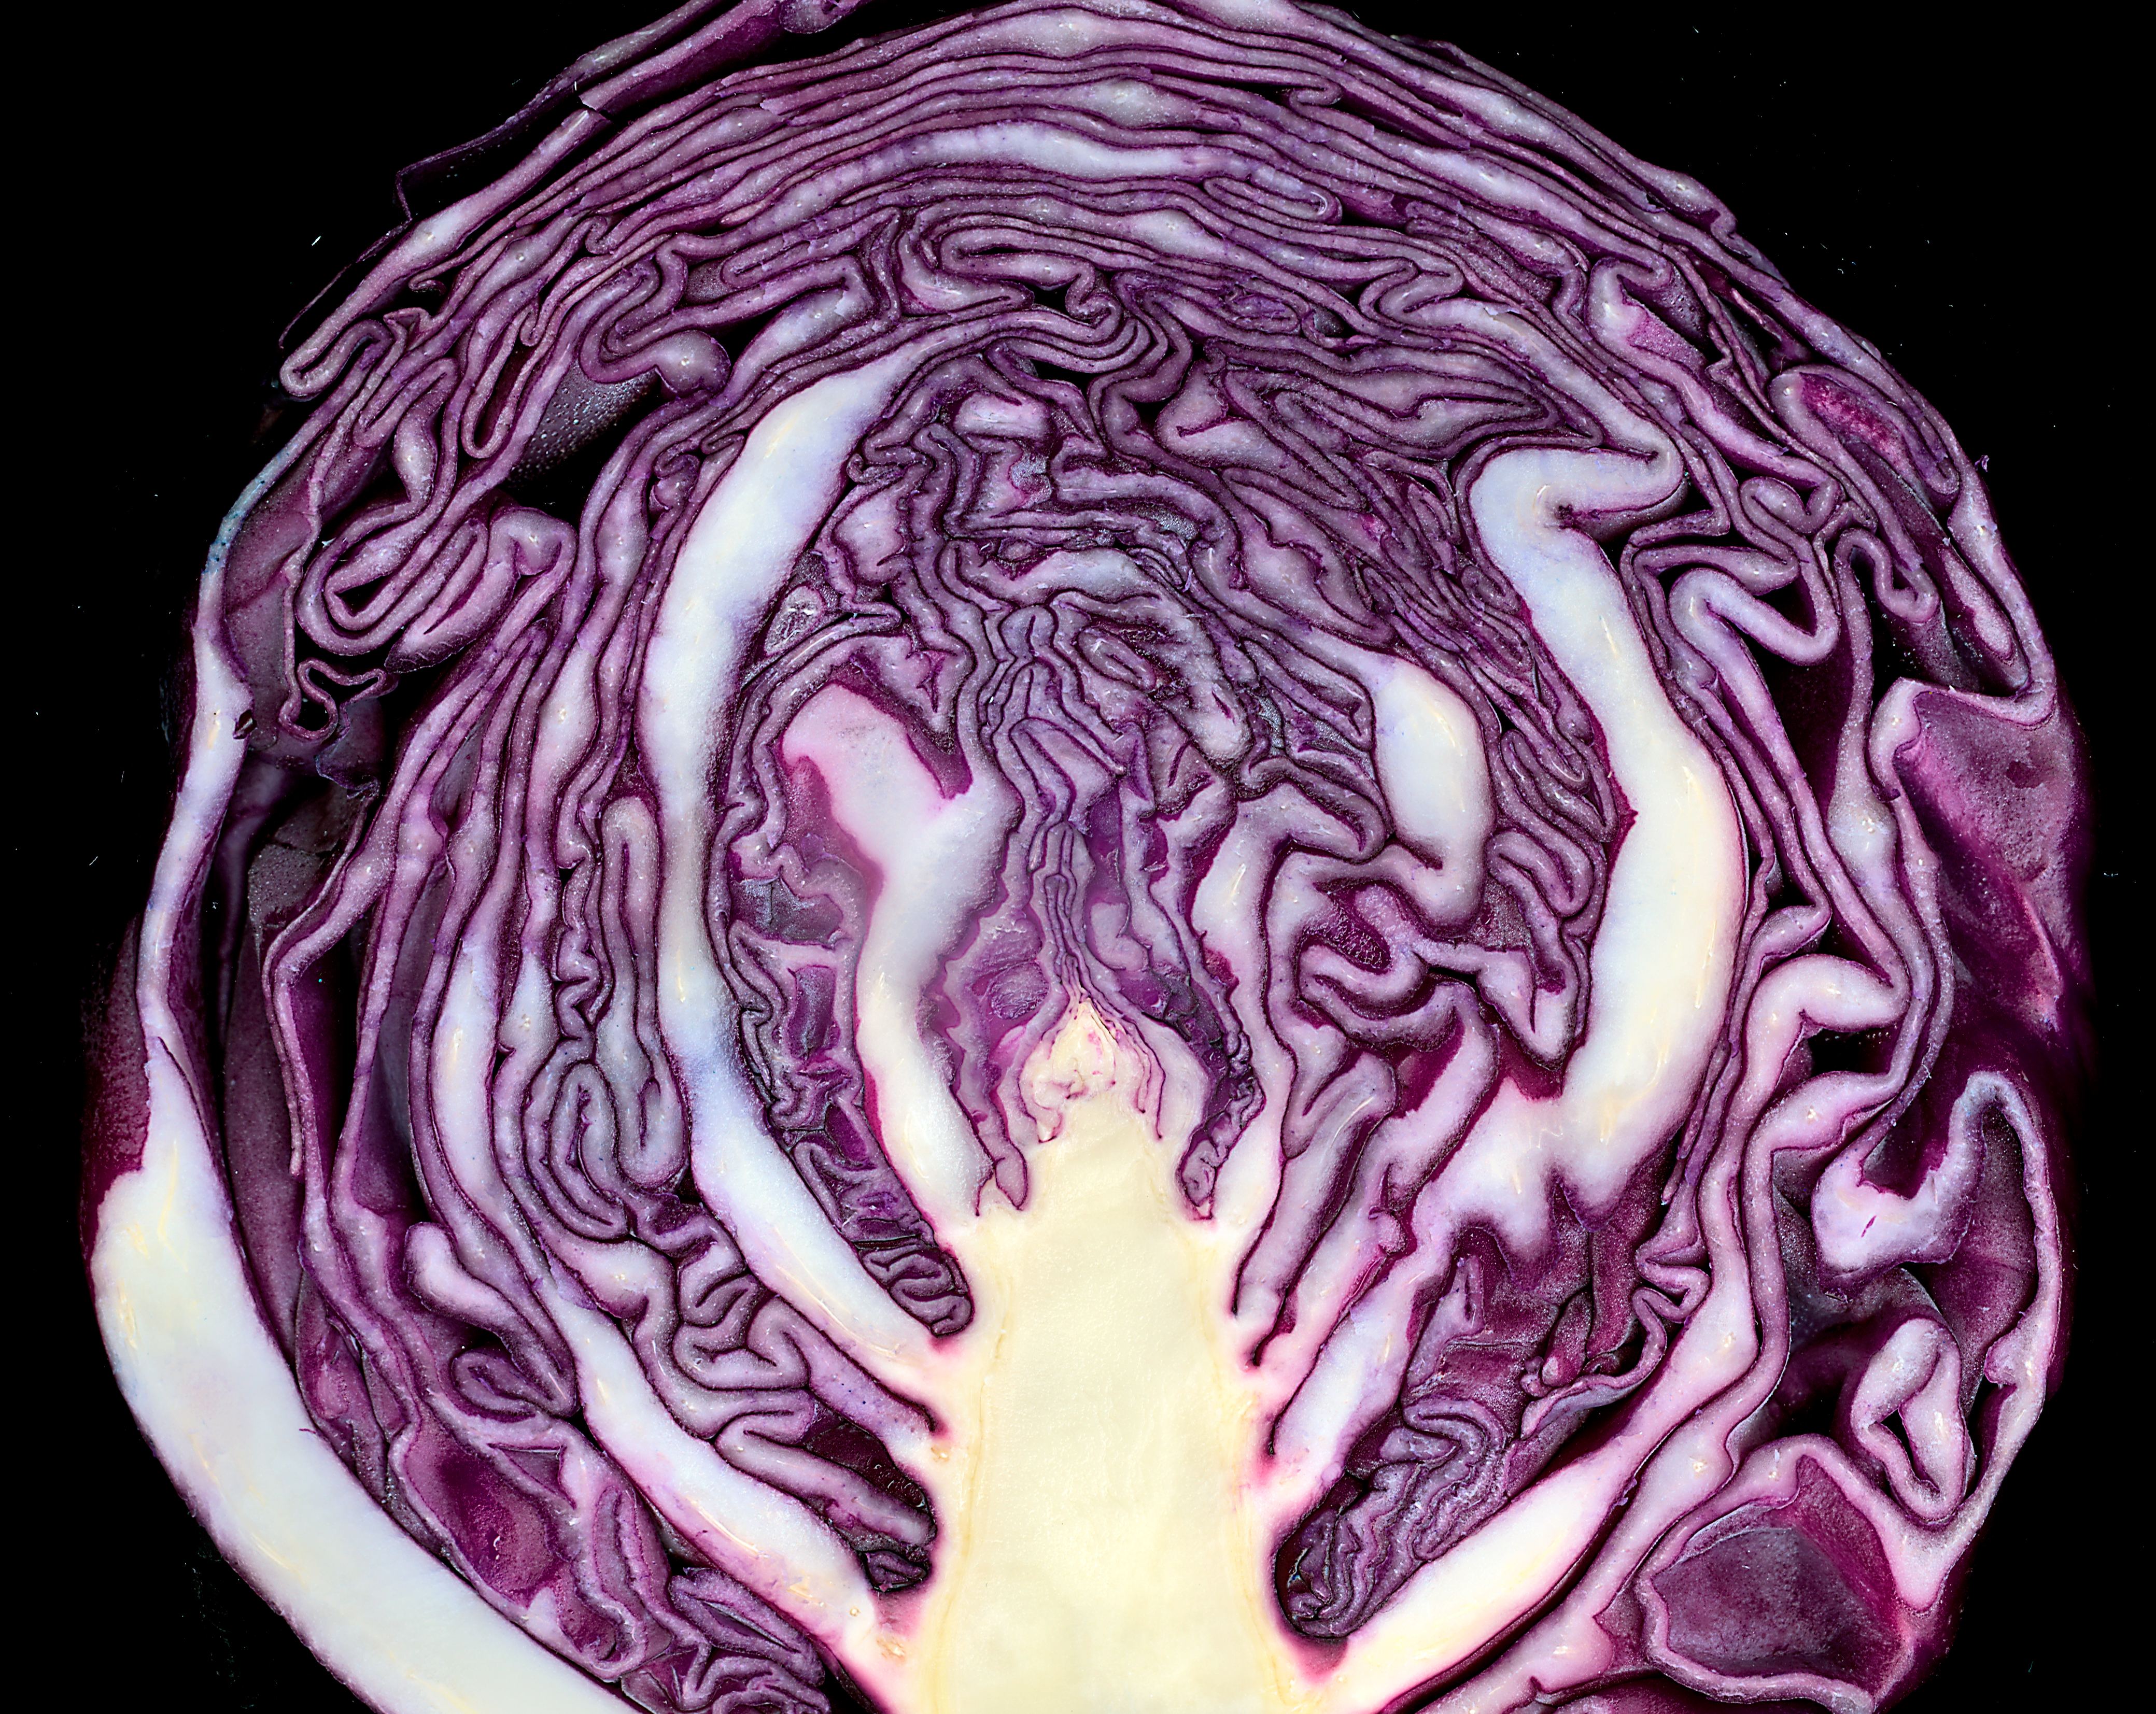 Red cabbage cross section 02